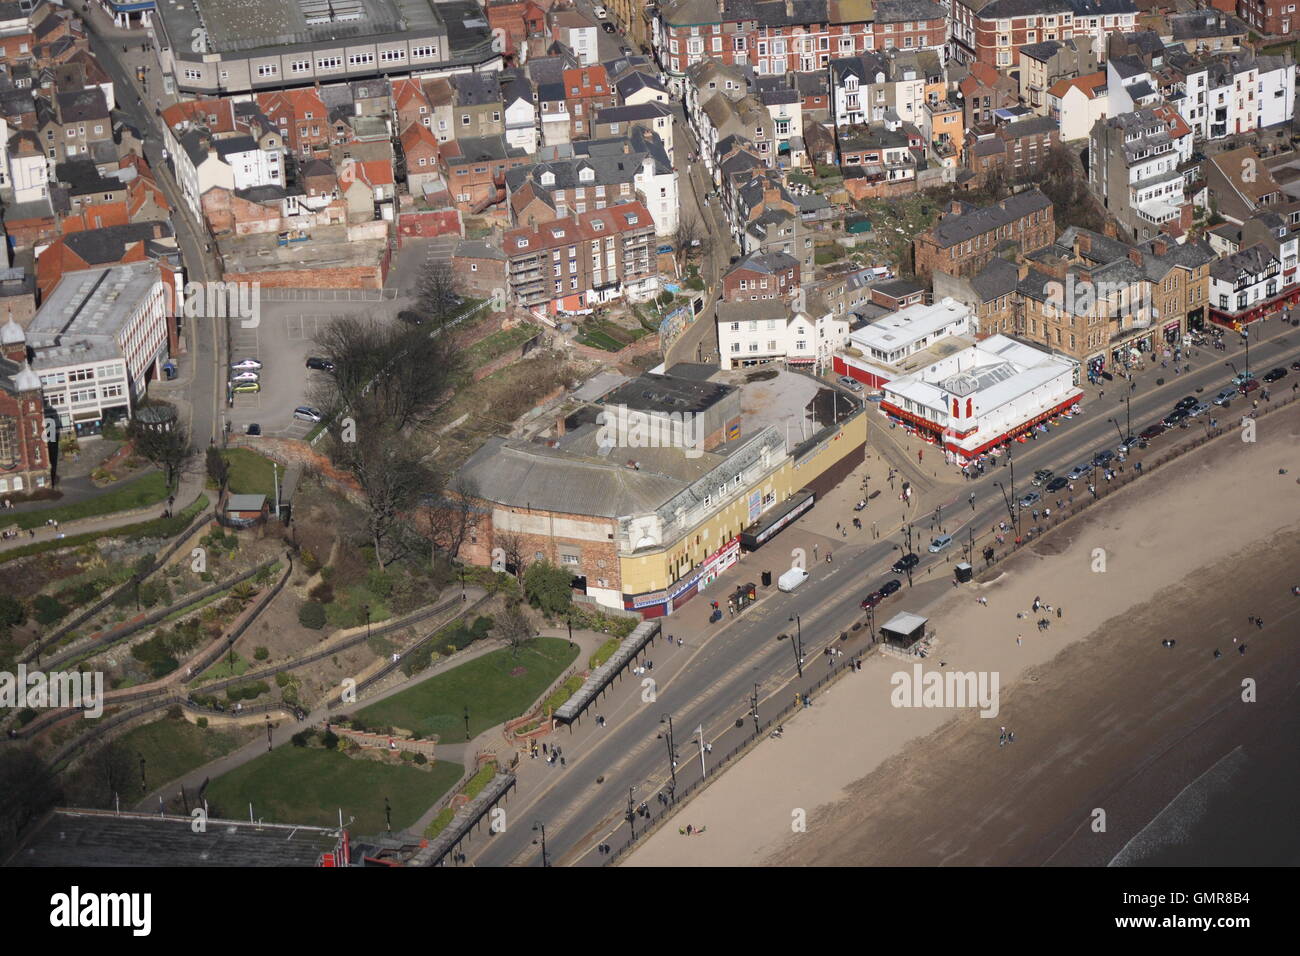 Aerial photo of Scarborough Futurist Theatre and seafront with St Nicholas Cliff Gardens Stock Photo